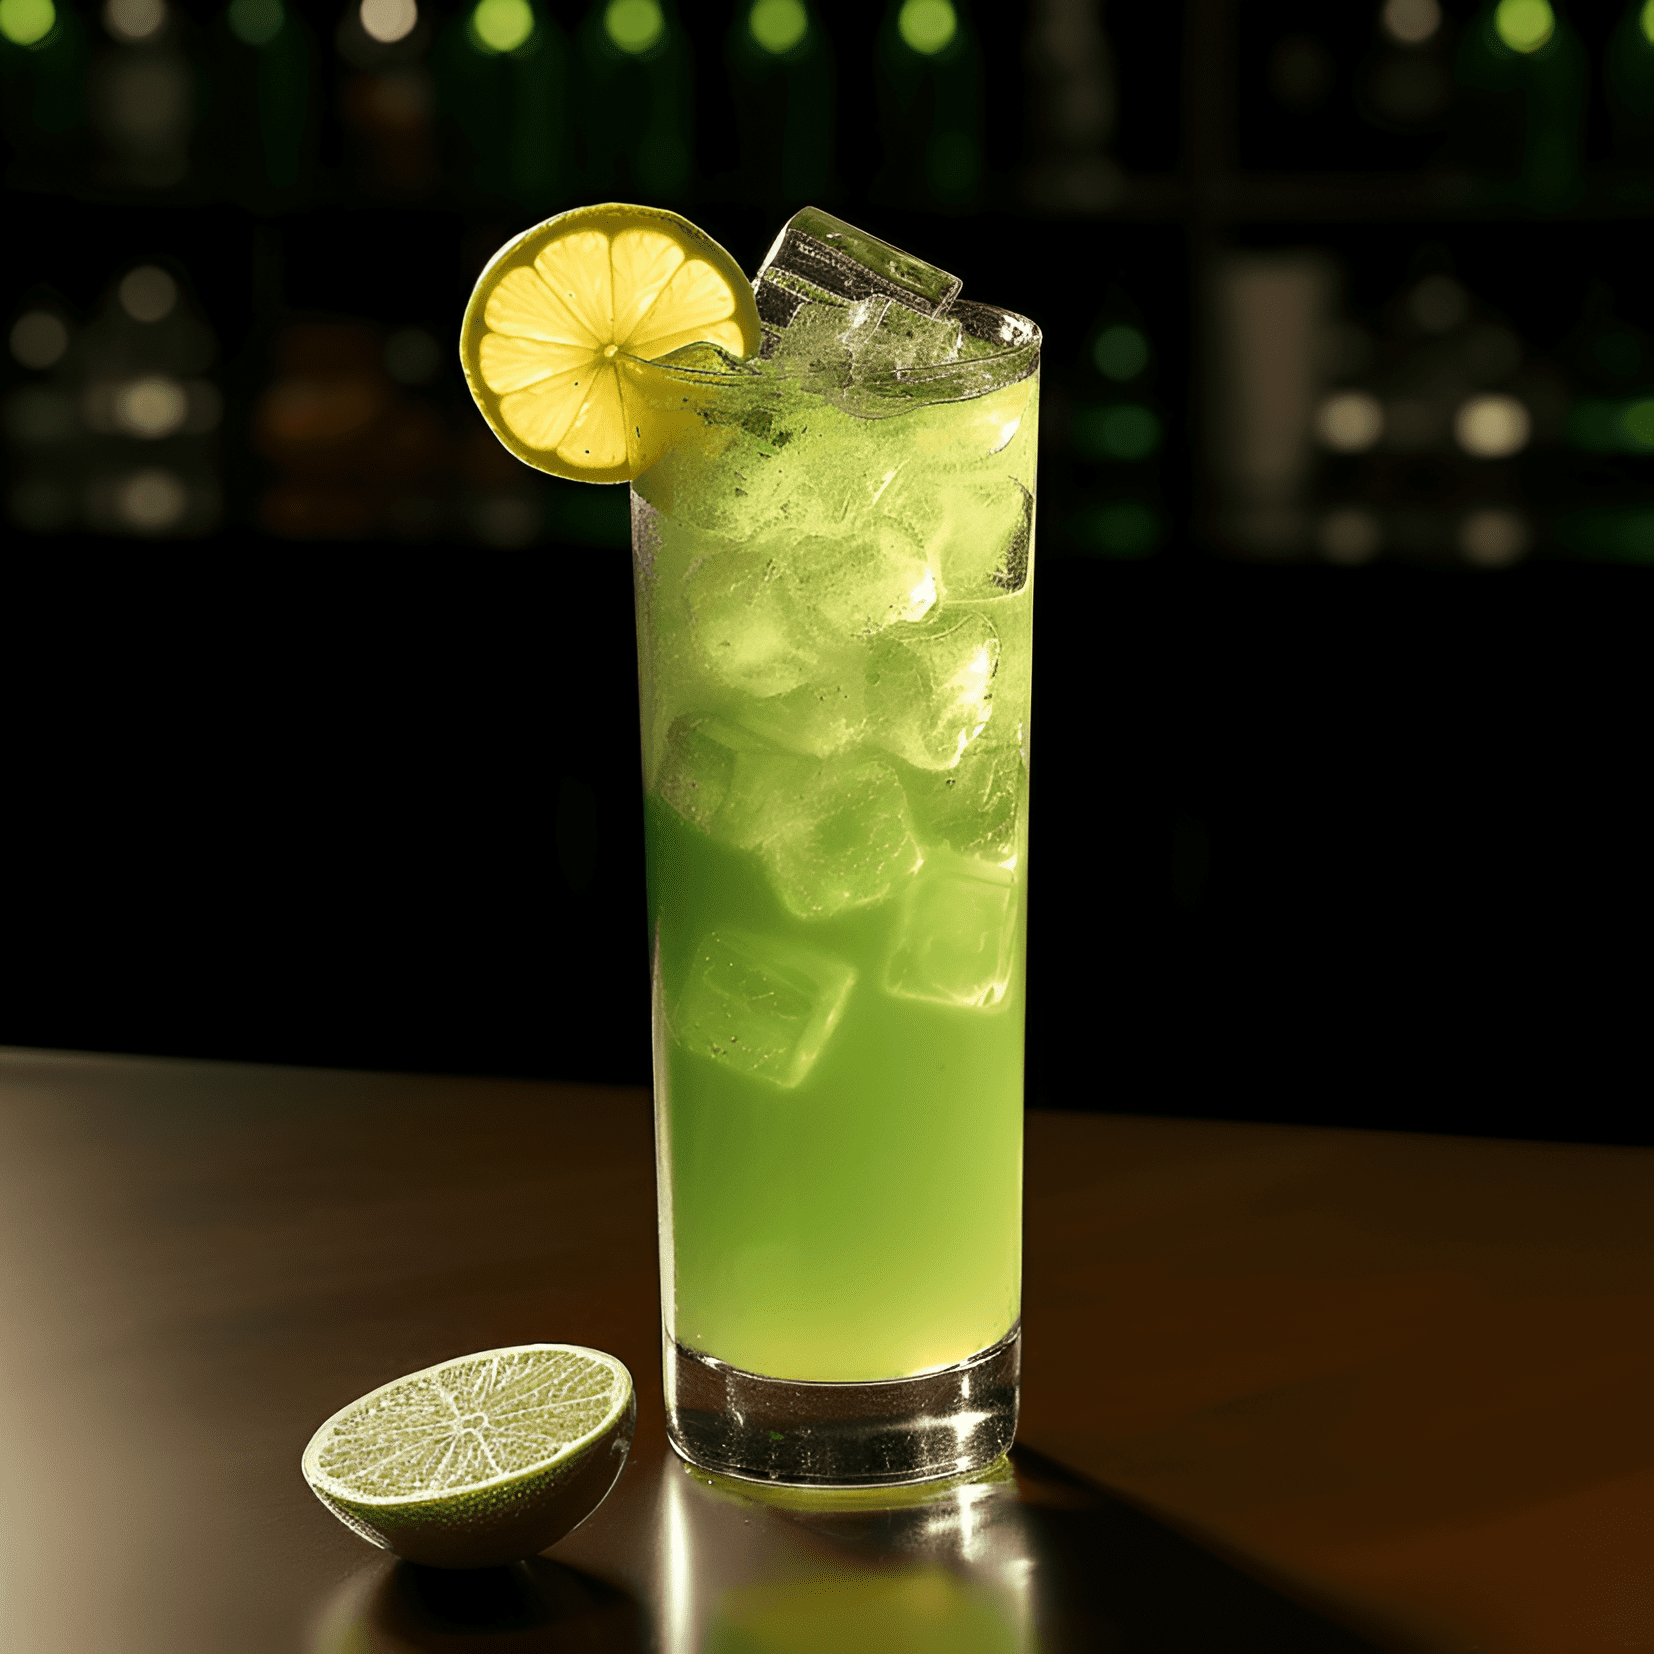 Lemon Lime Cocktail Recipe - The Lemon Lime cocktail boasts a harmonious balance of sweet and sour flavors, with the zesty tang of lemon and lime shining through. It's a light and refreshing drink with a subtle hint of effervescence, making it perfect for sipping on a hot day.